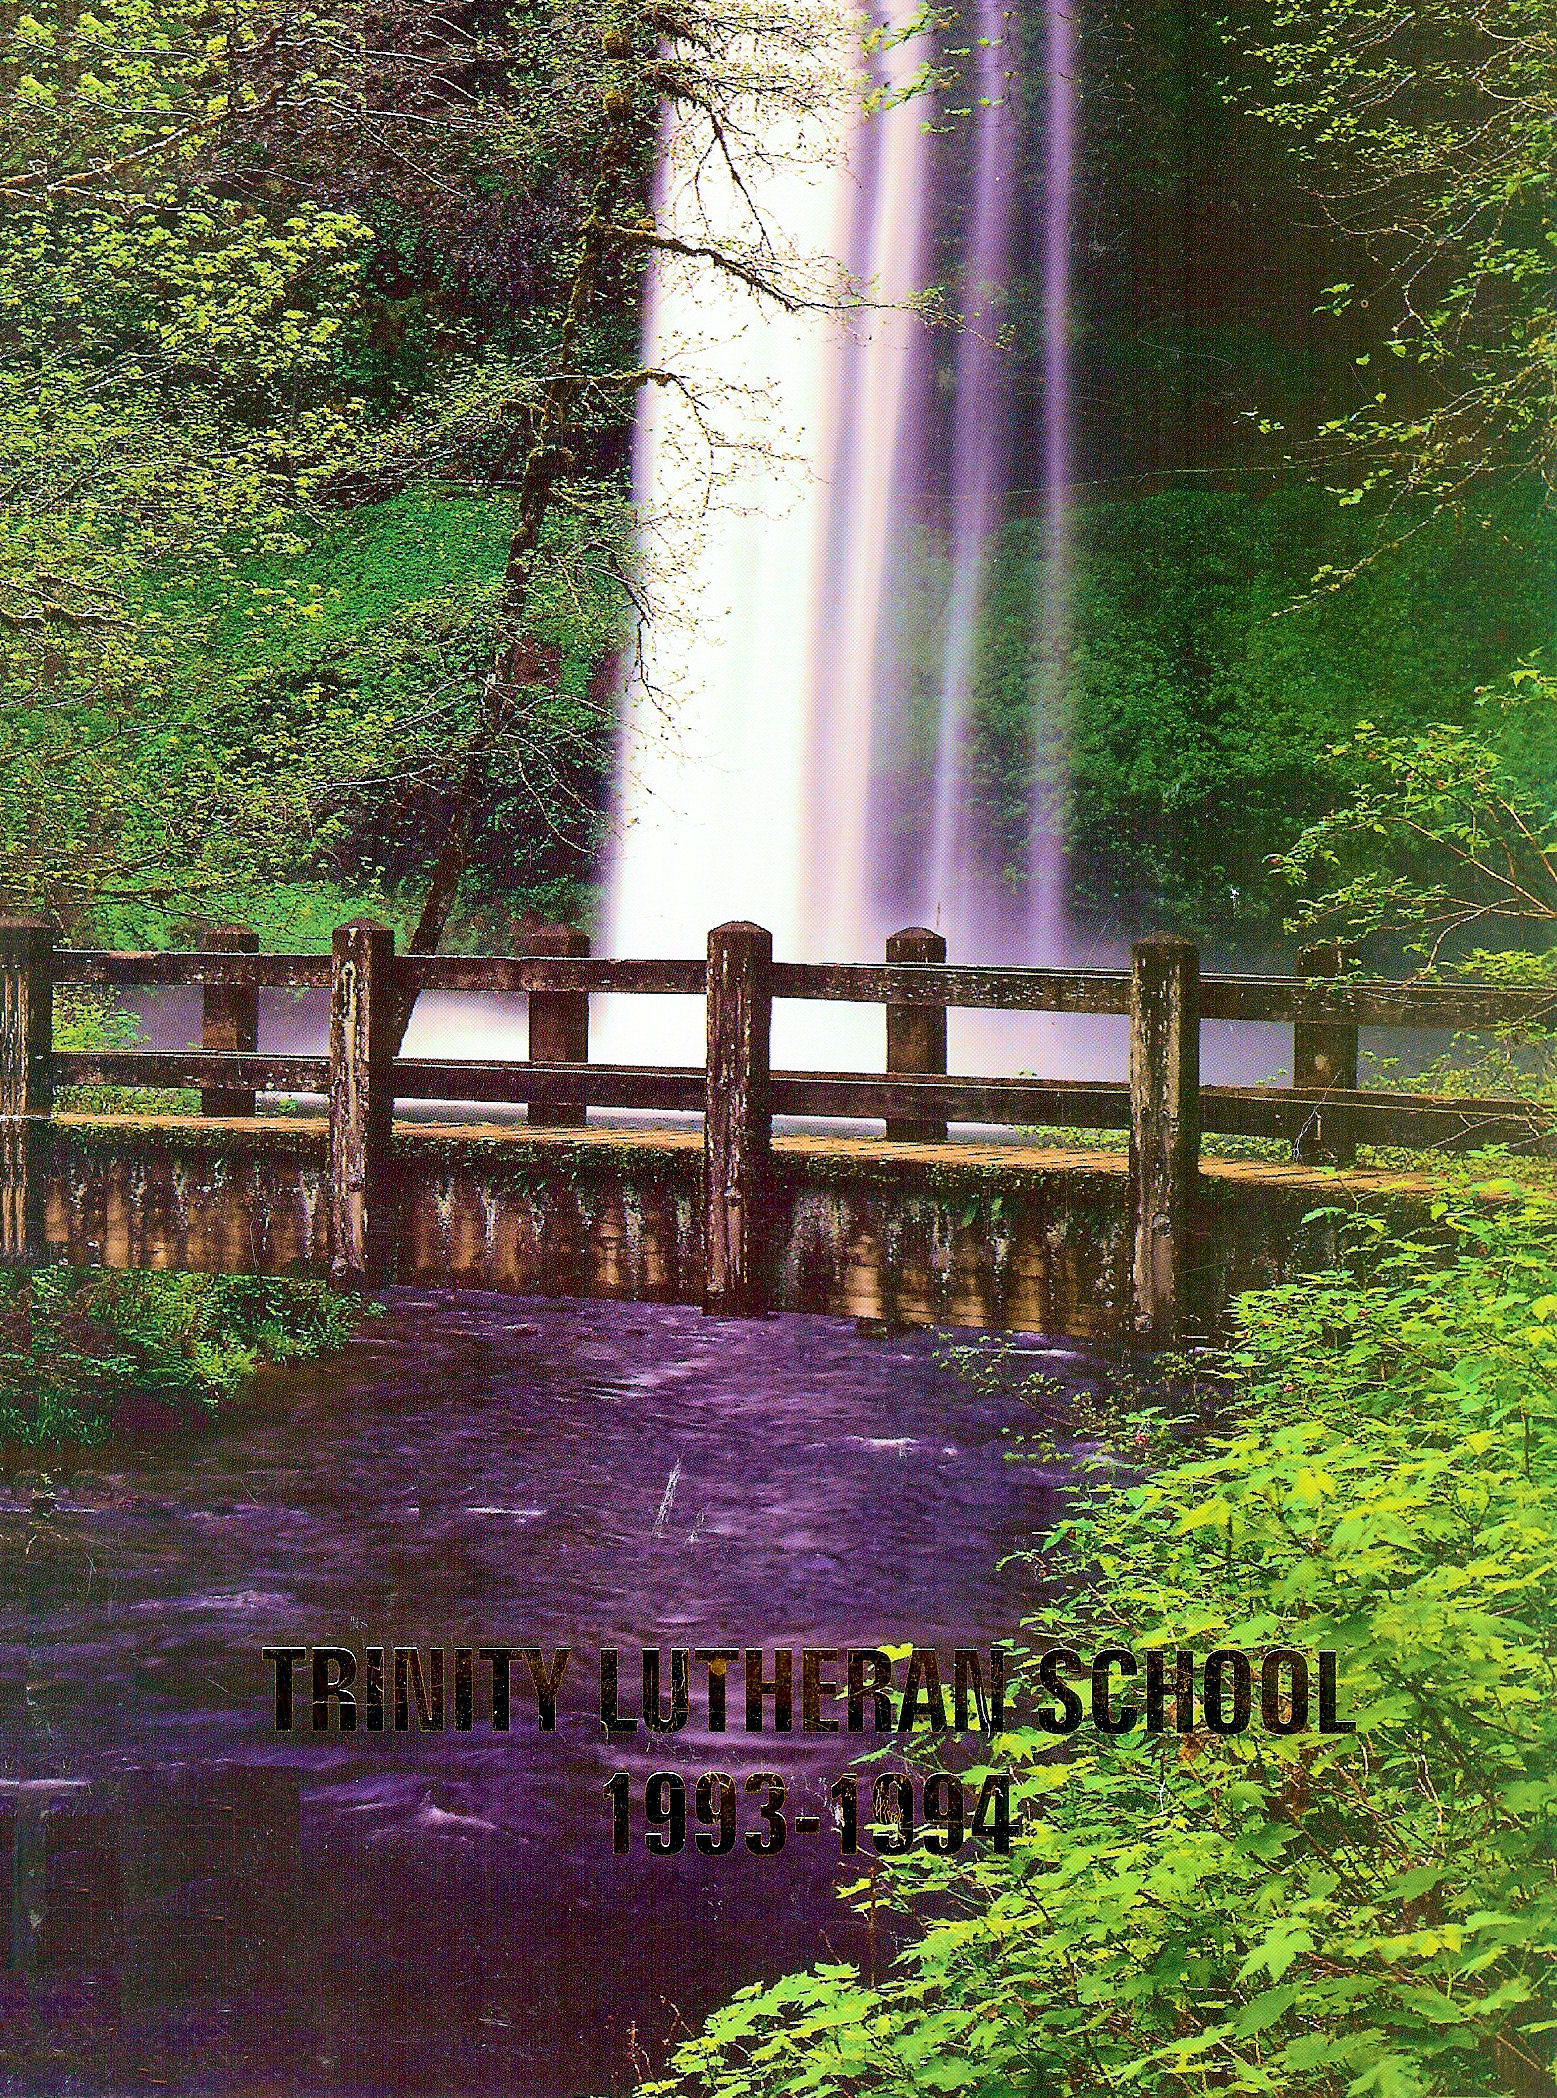 93-94 Yearbook Cover